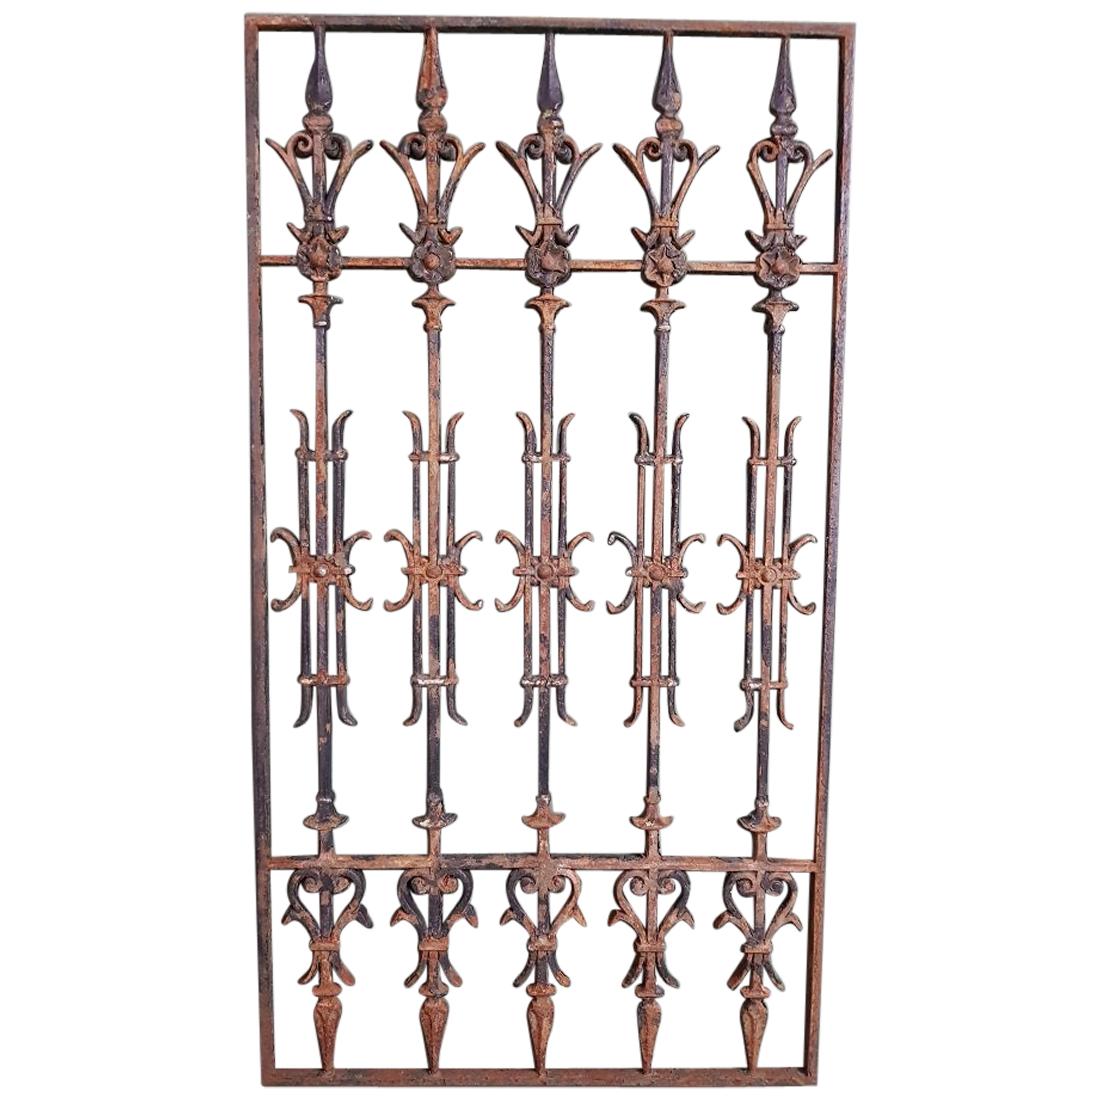 Early 20th Century French Cast Iron Door Fence or Grill.